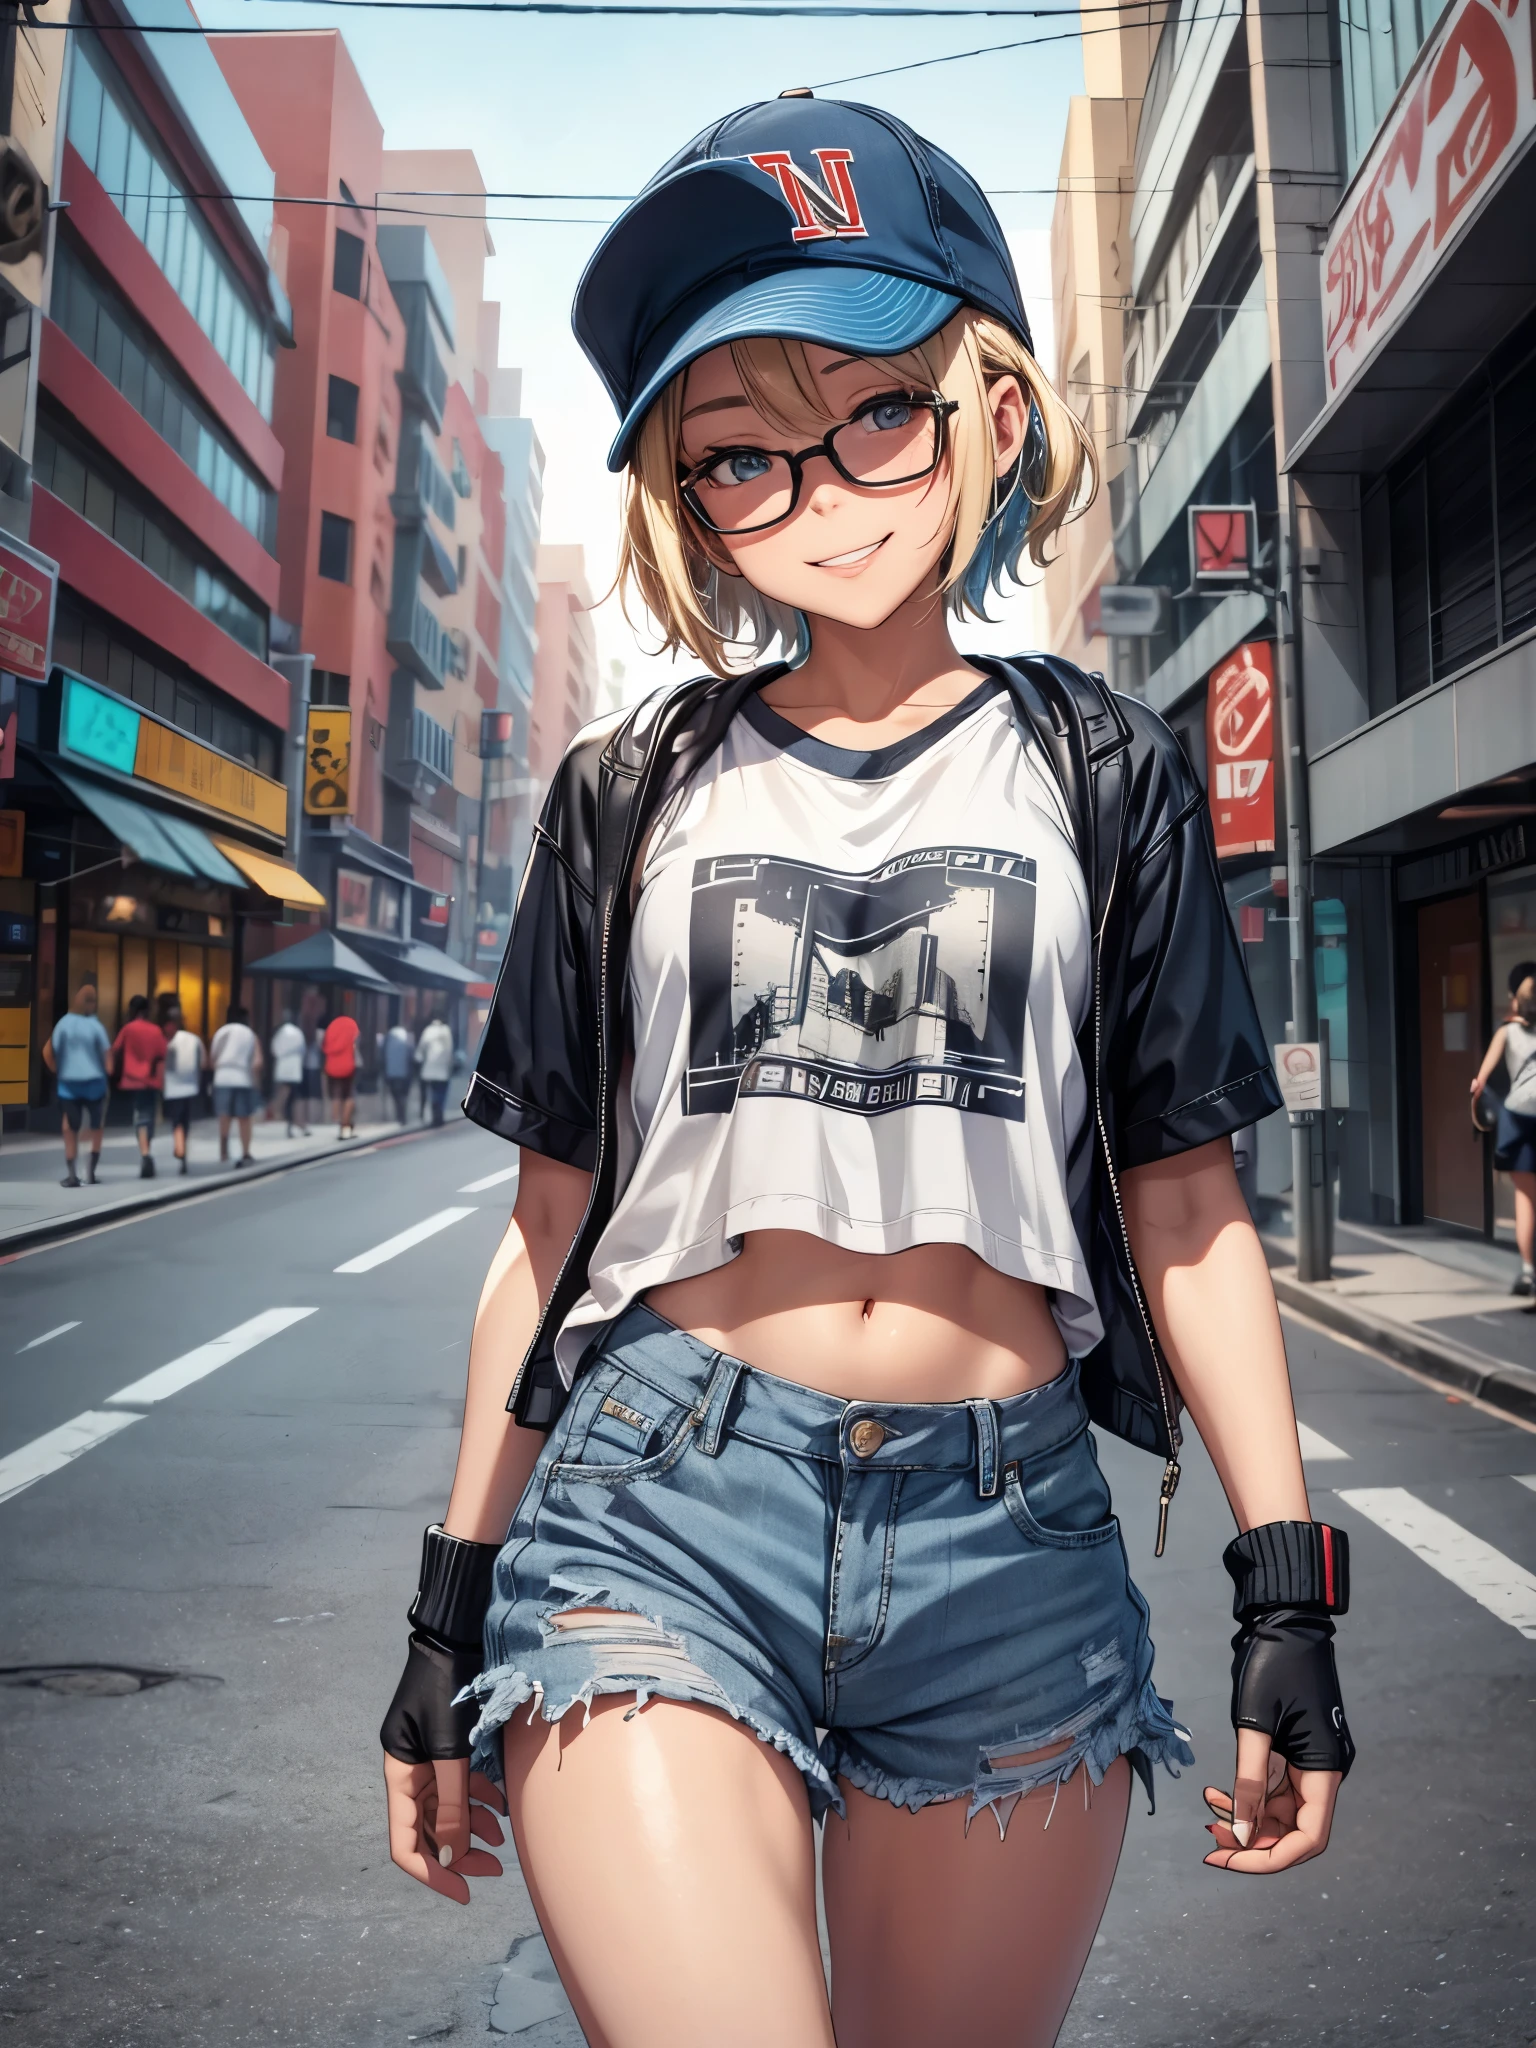 Outside the street,one 18-aged girl, cowboy shot,blonde short hair colored mixed blue hair, baseball cap,walking the street,wearing glasses,grin, smile,natural-make-up,cyber punk fashion,hoodle,leather-shorts, ((loose socks,sneakers))